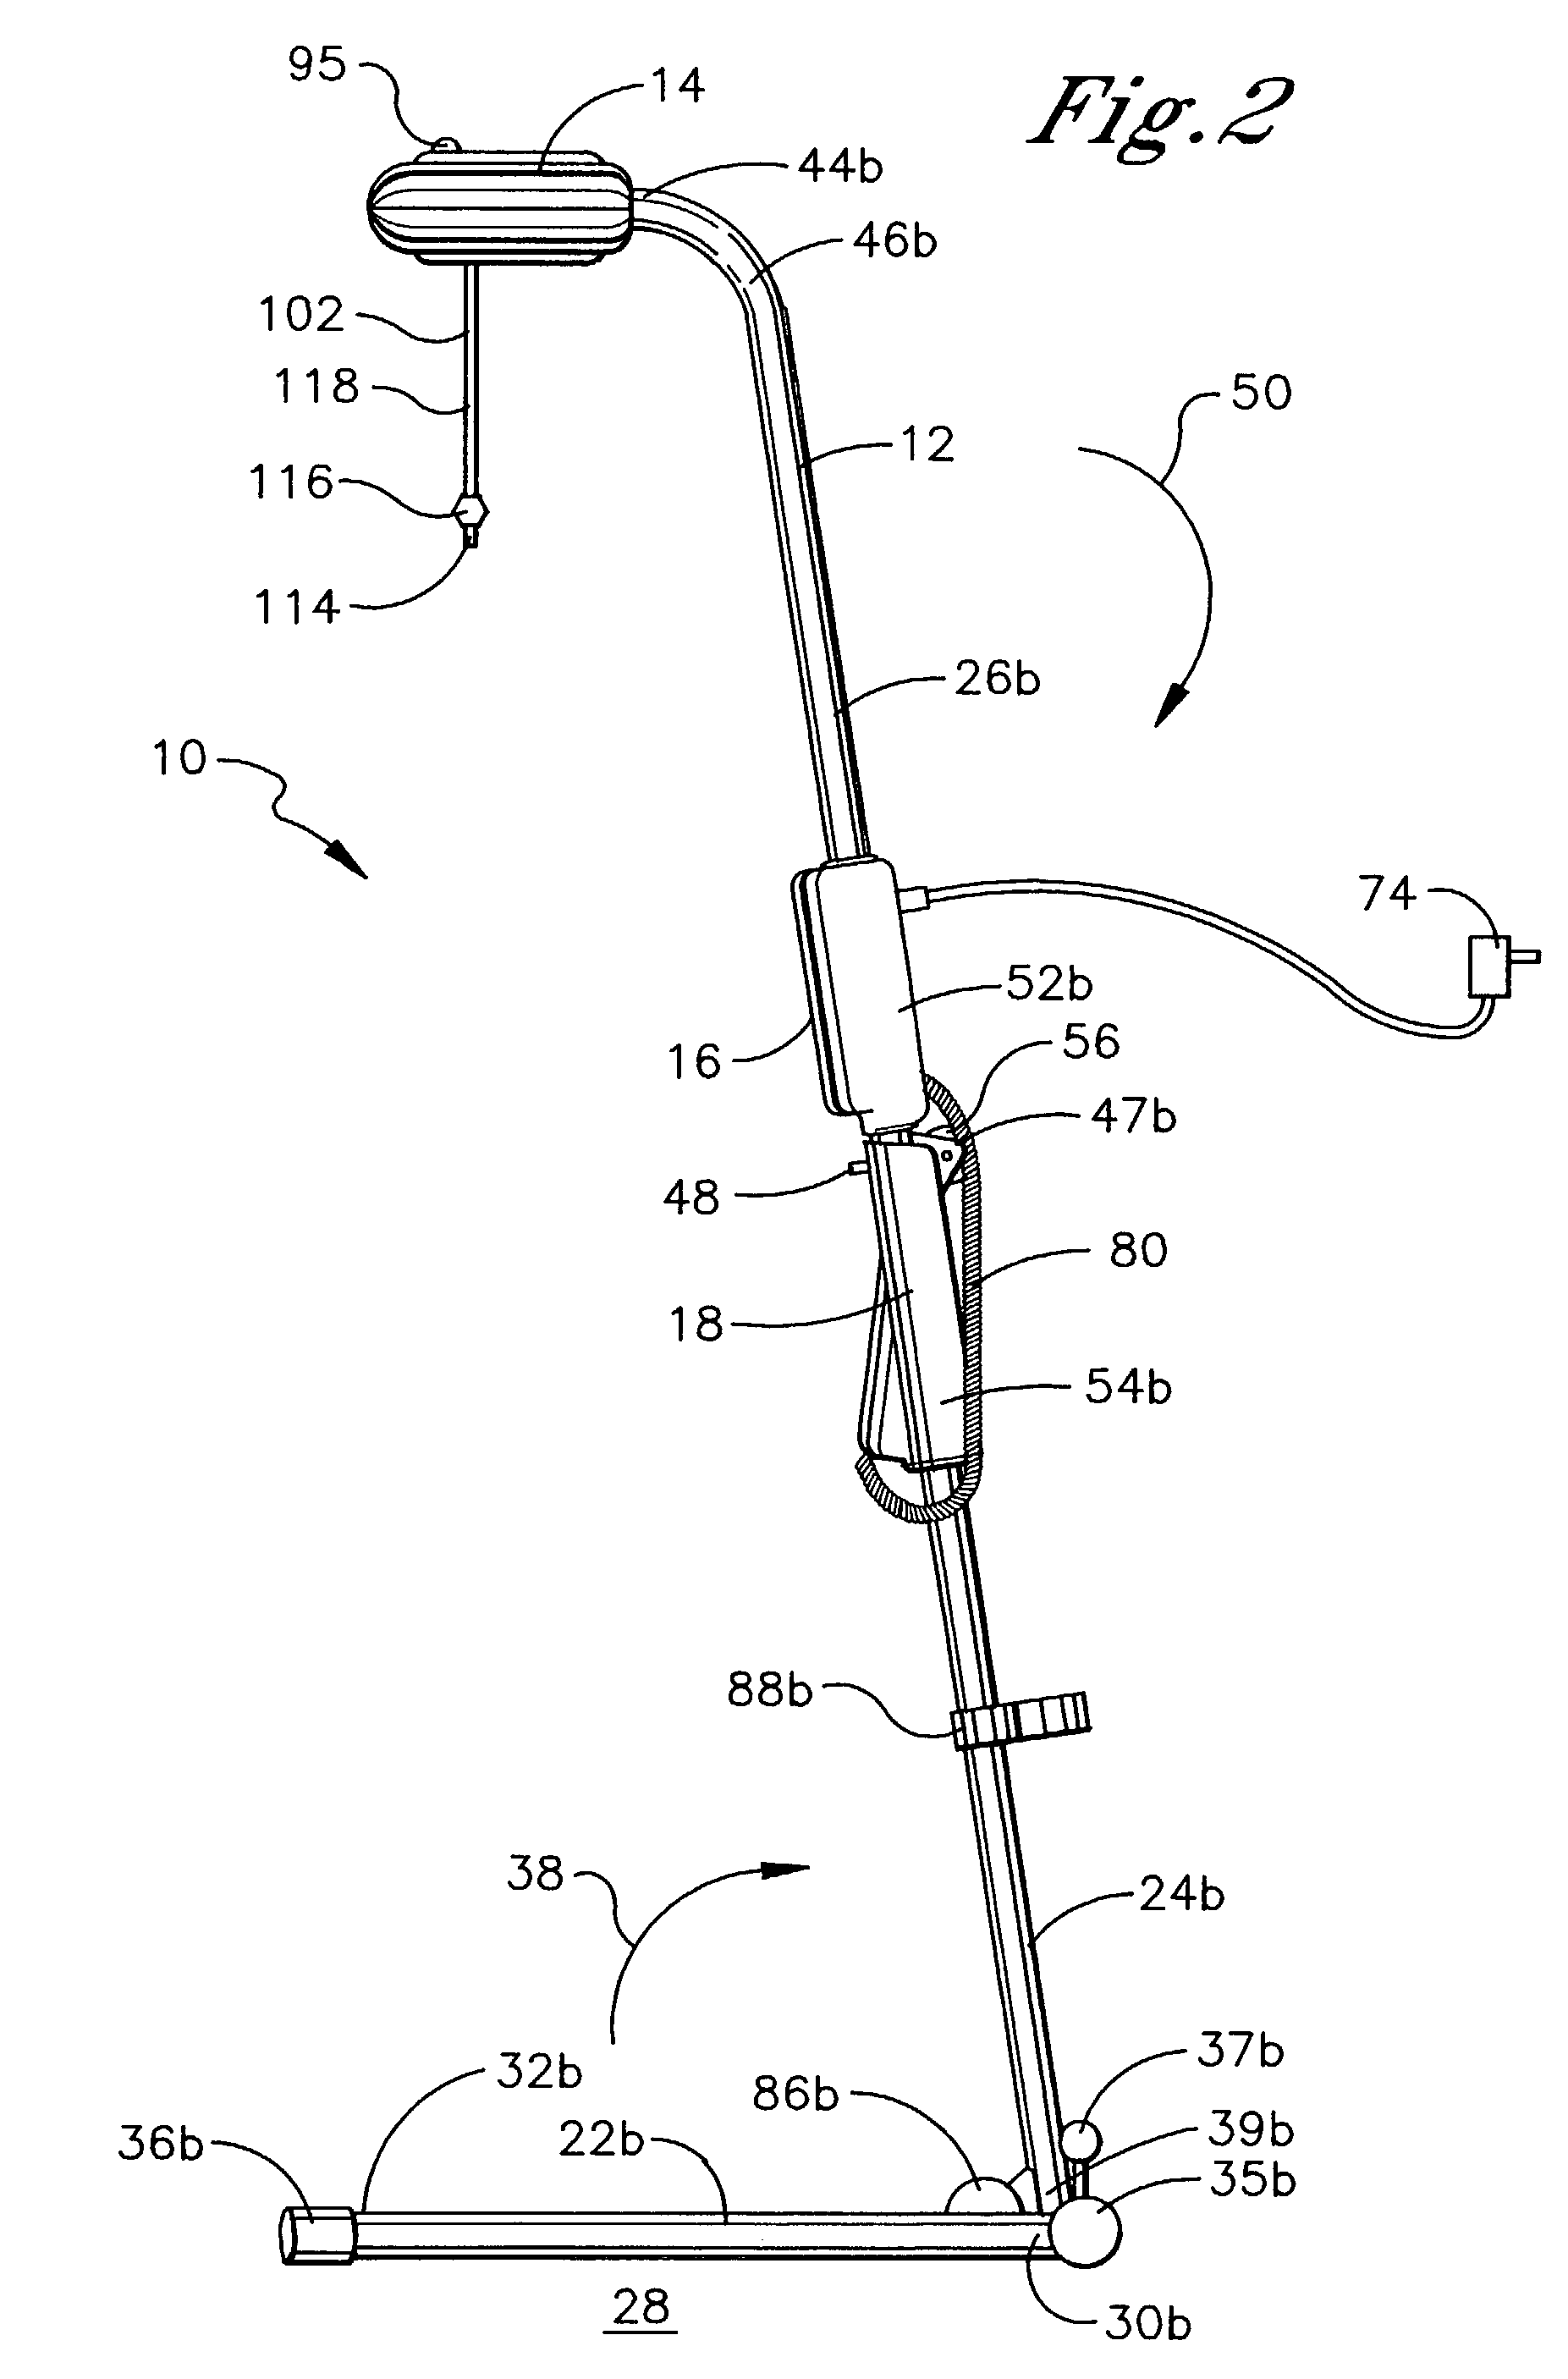 Continuous passive motion device for rehabilitation of the elbow or shoulder